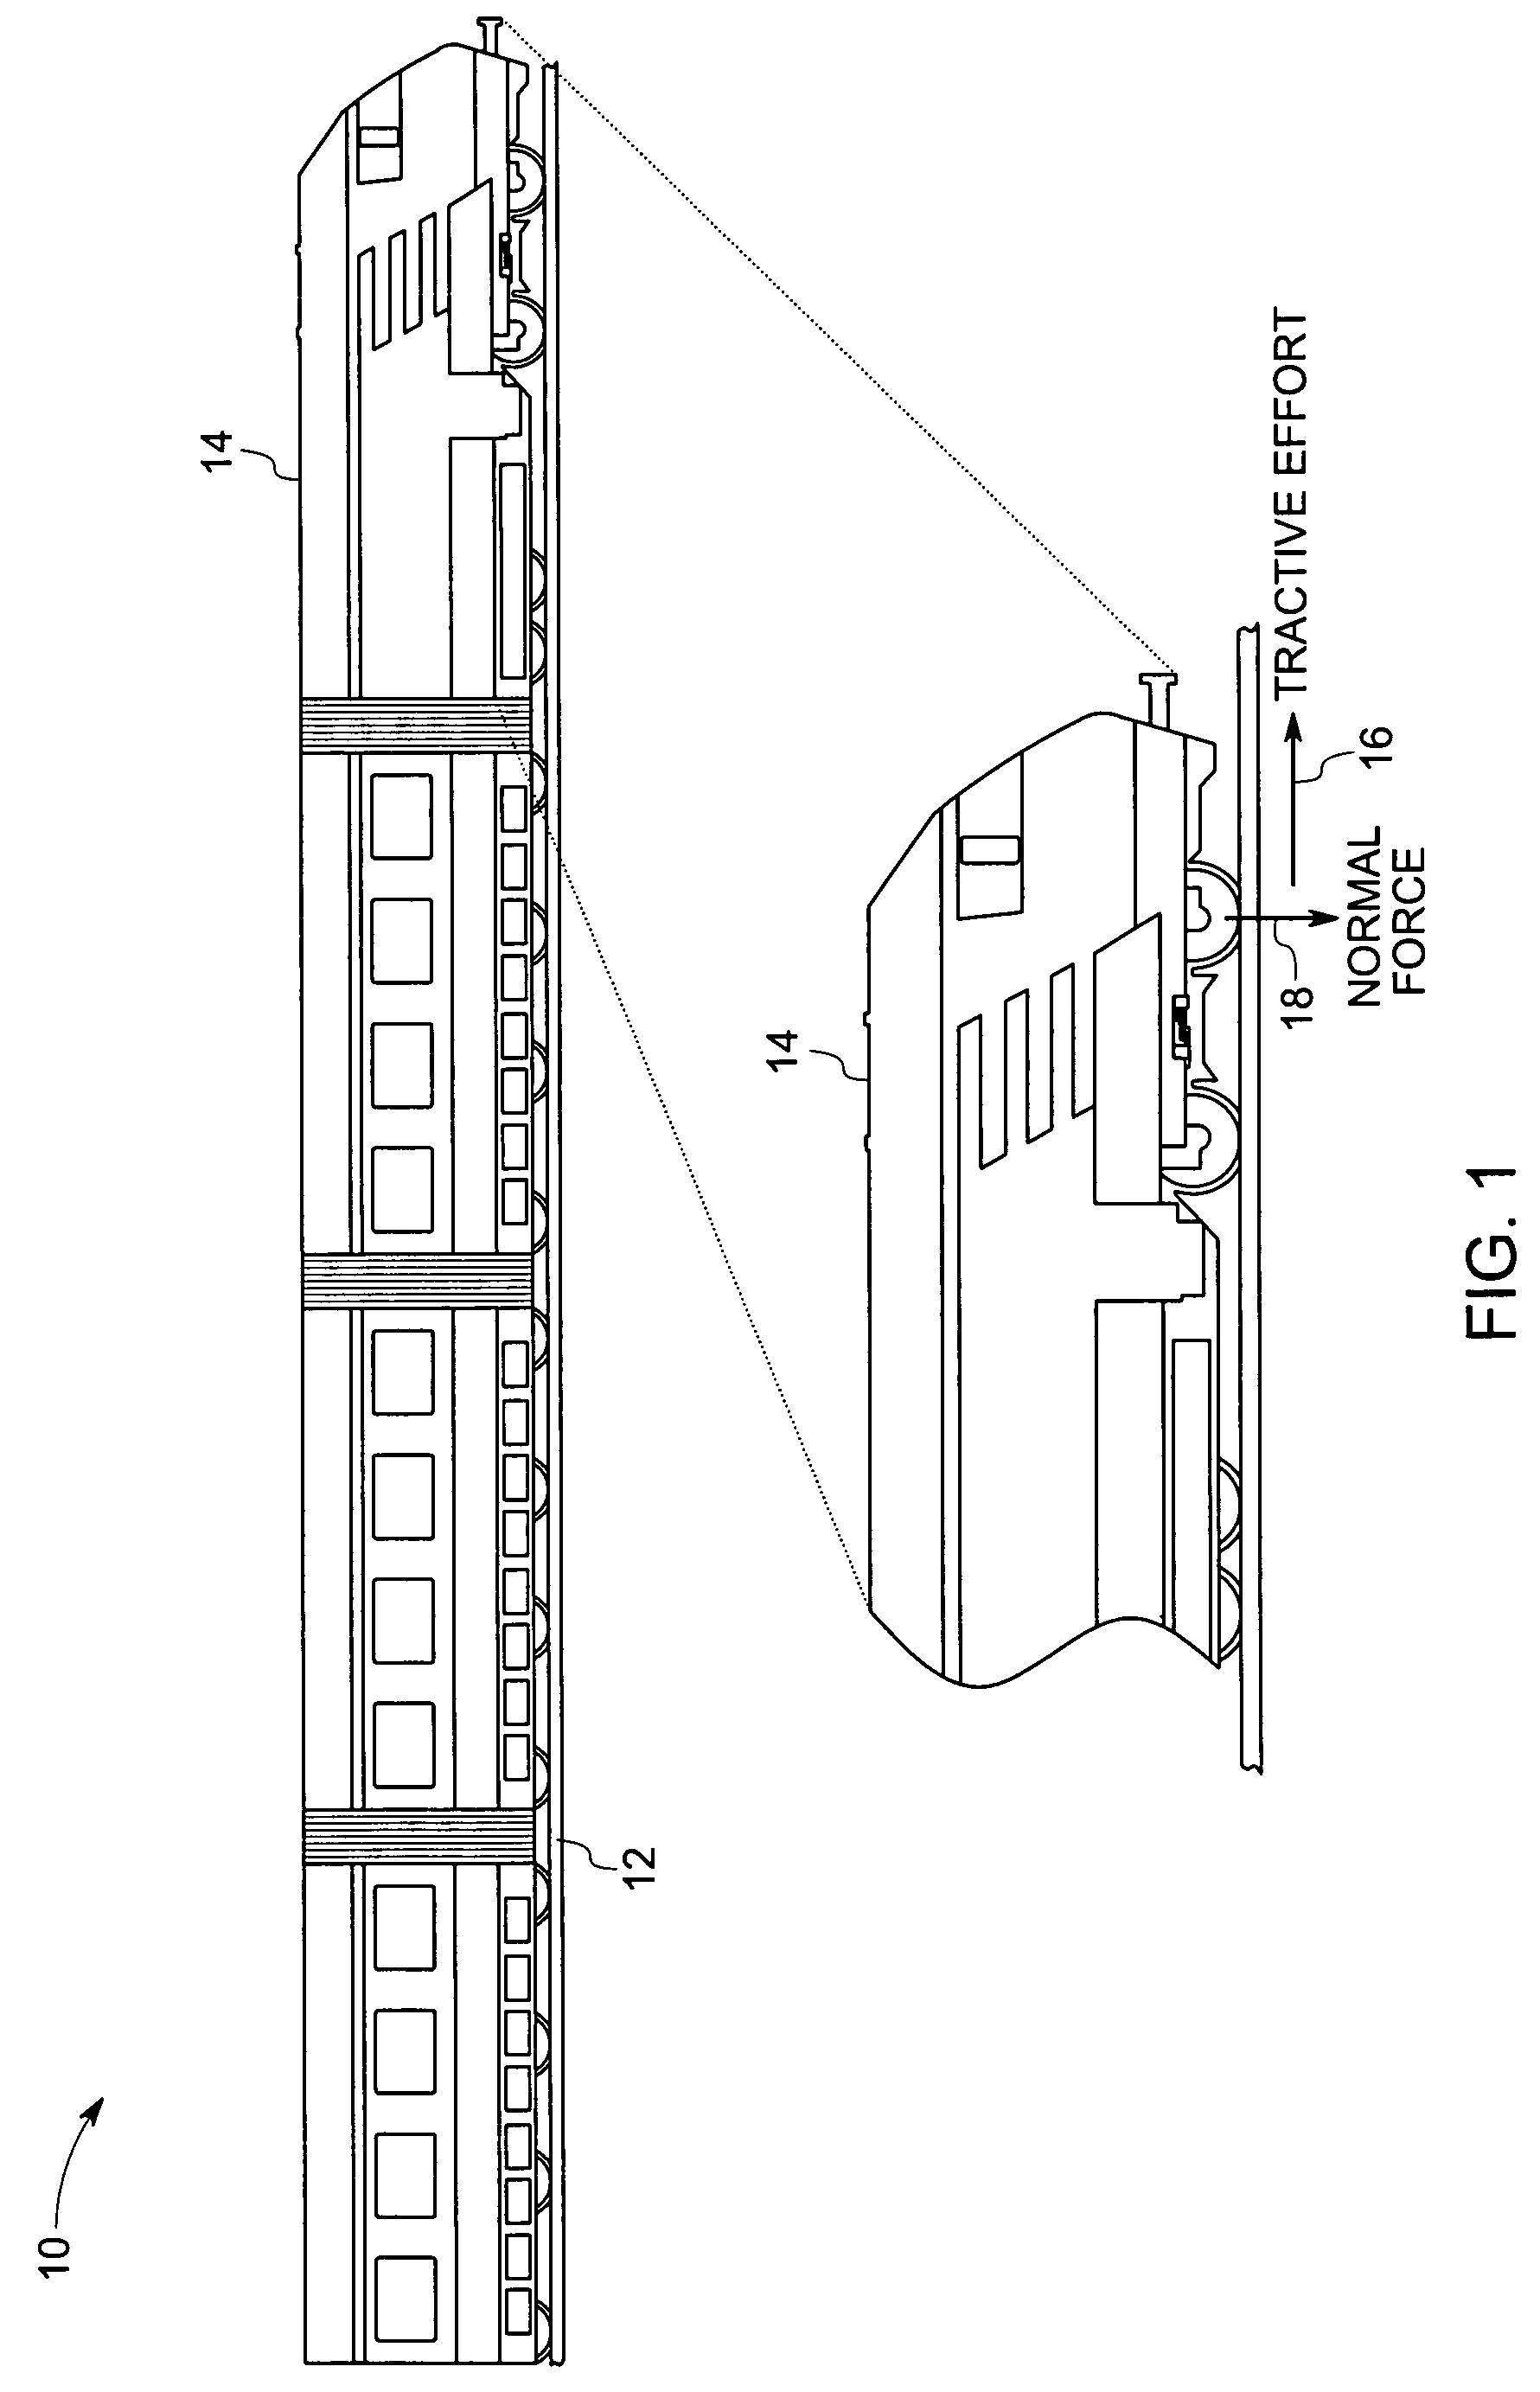 System and method for locomotive adhesion control